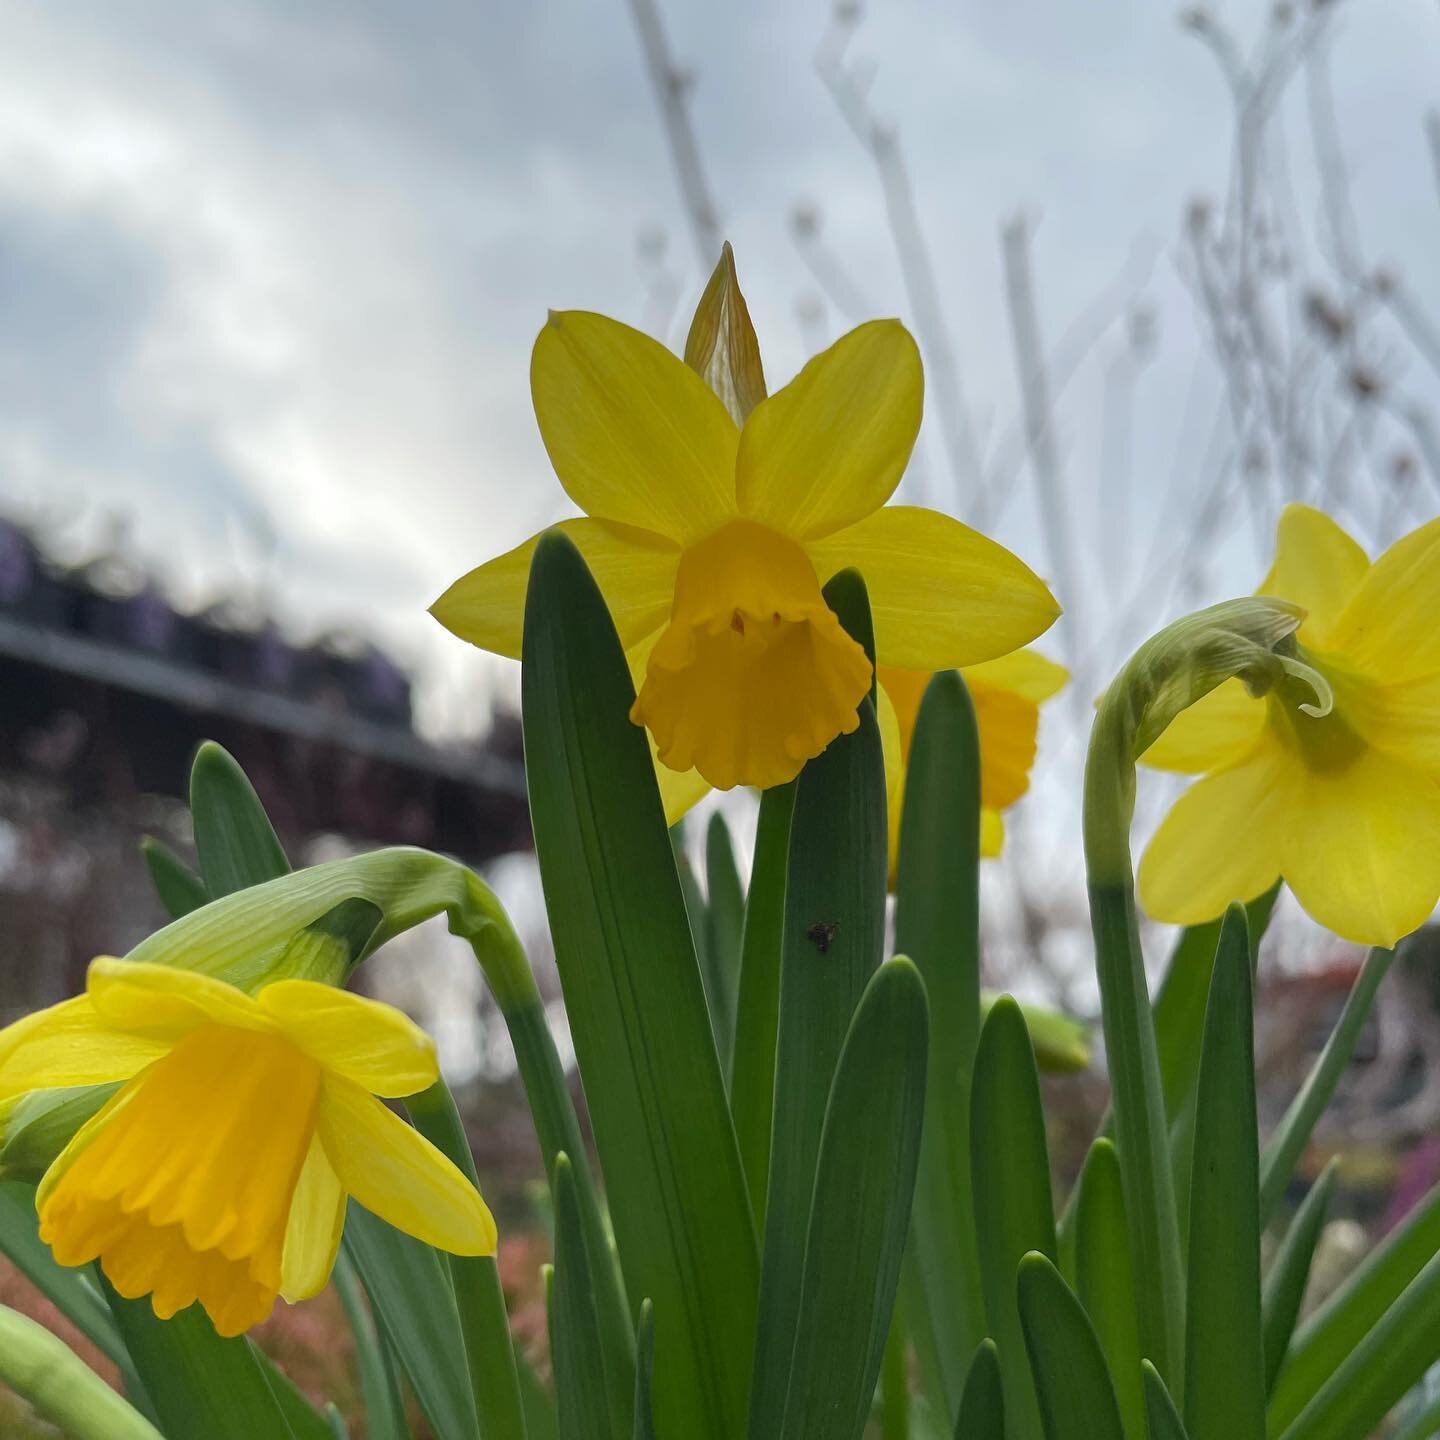 Spring is in the air 💚🌱

#daffodil #daffodils #spring #garden #gardening  #bulbs #happy #ansellgc #gardencentrelife #plants #flowers